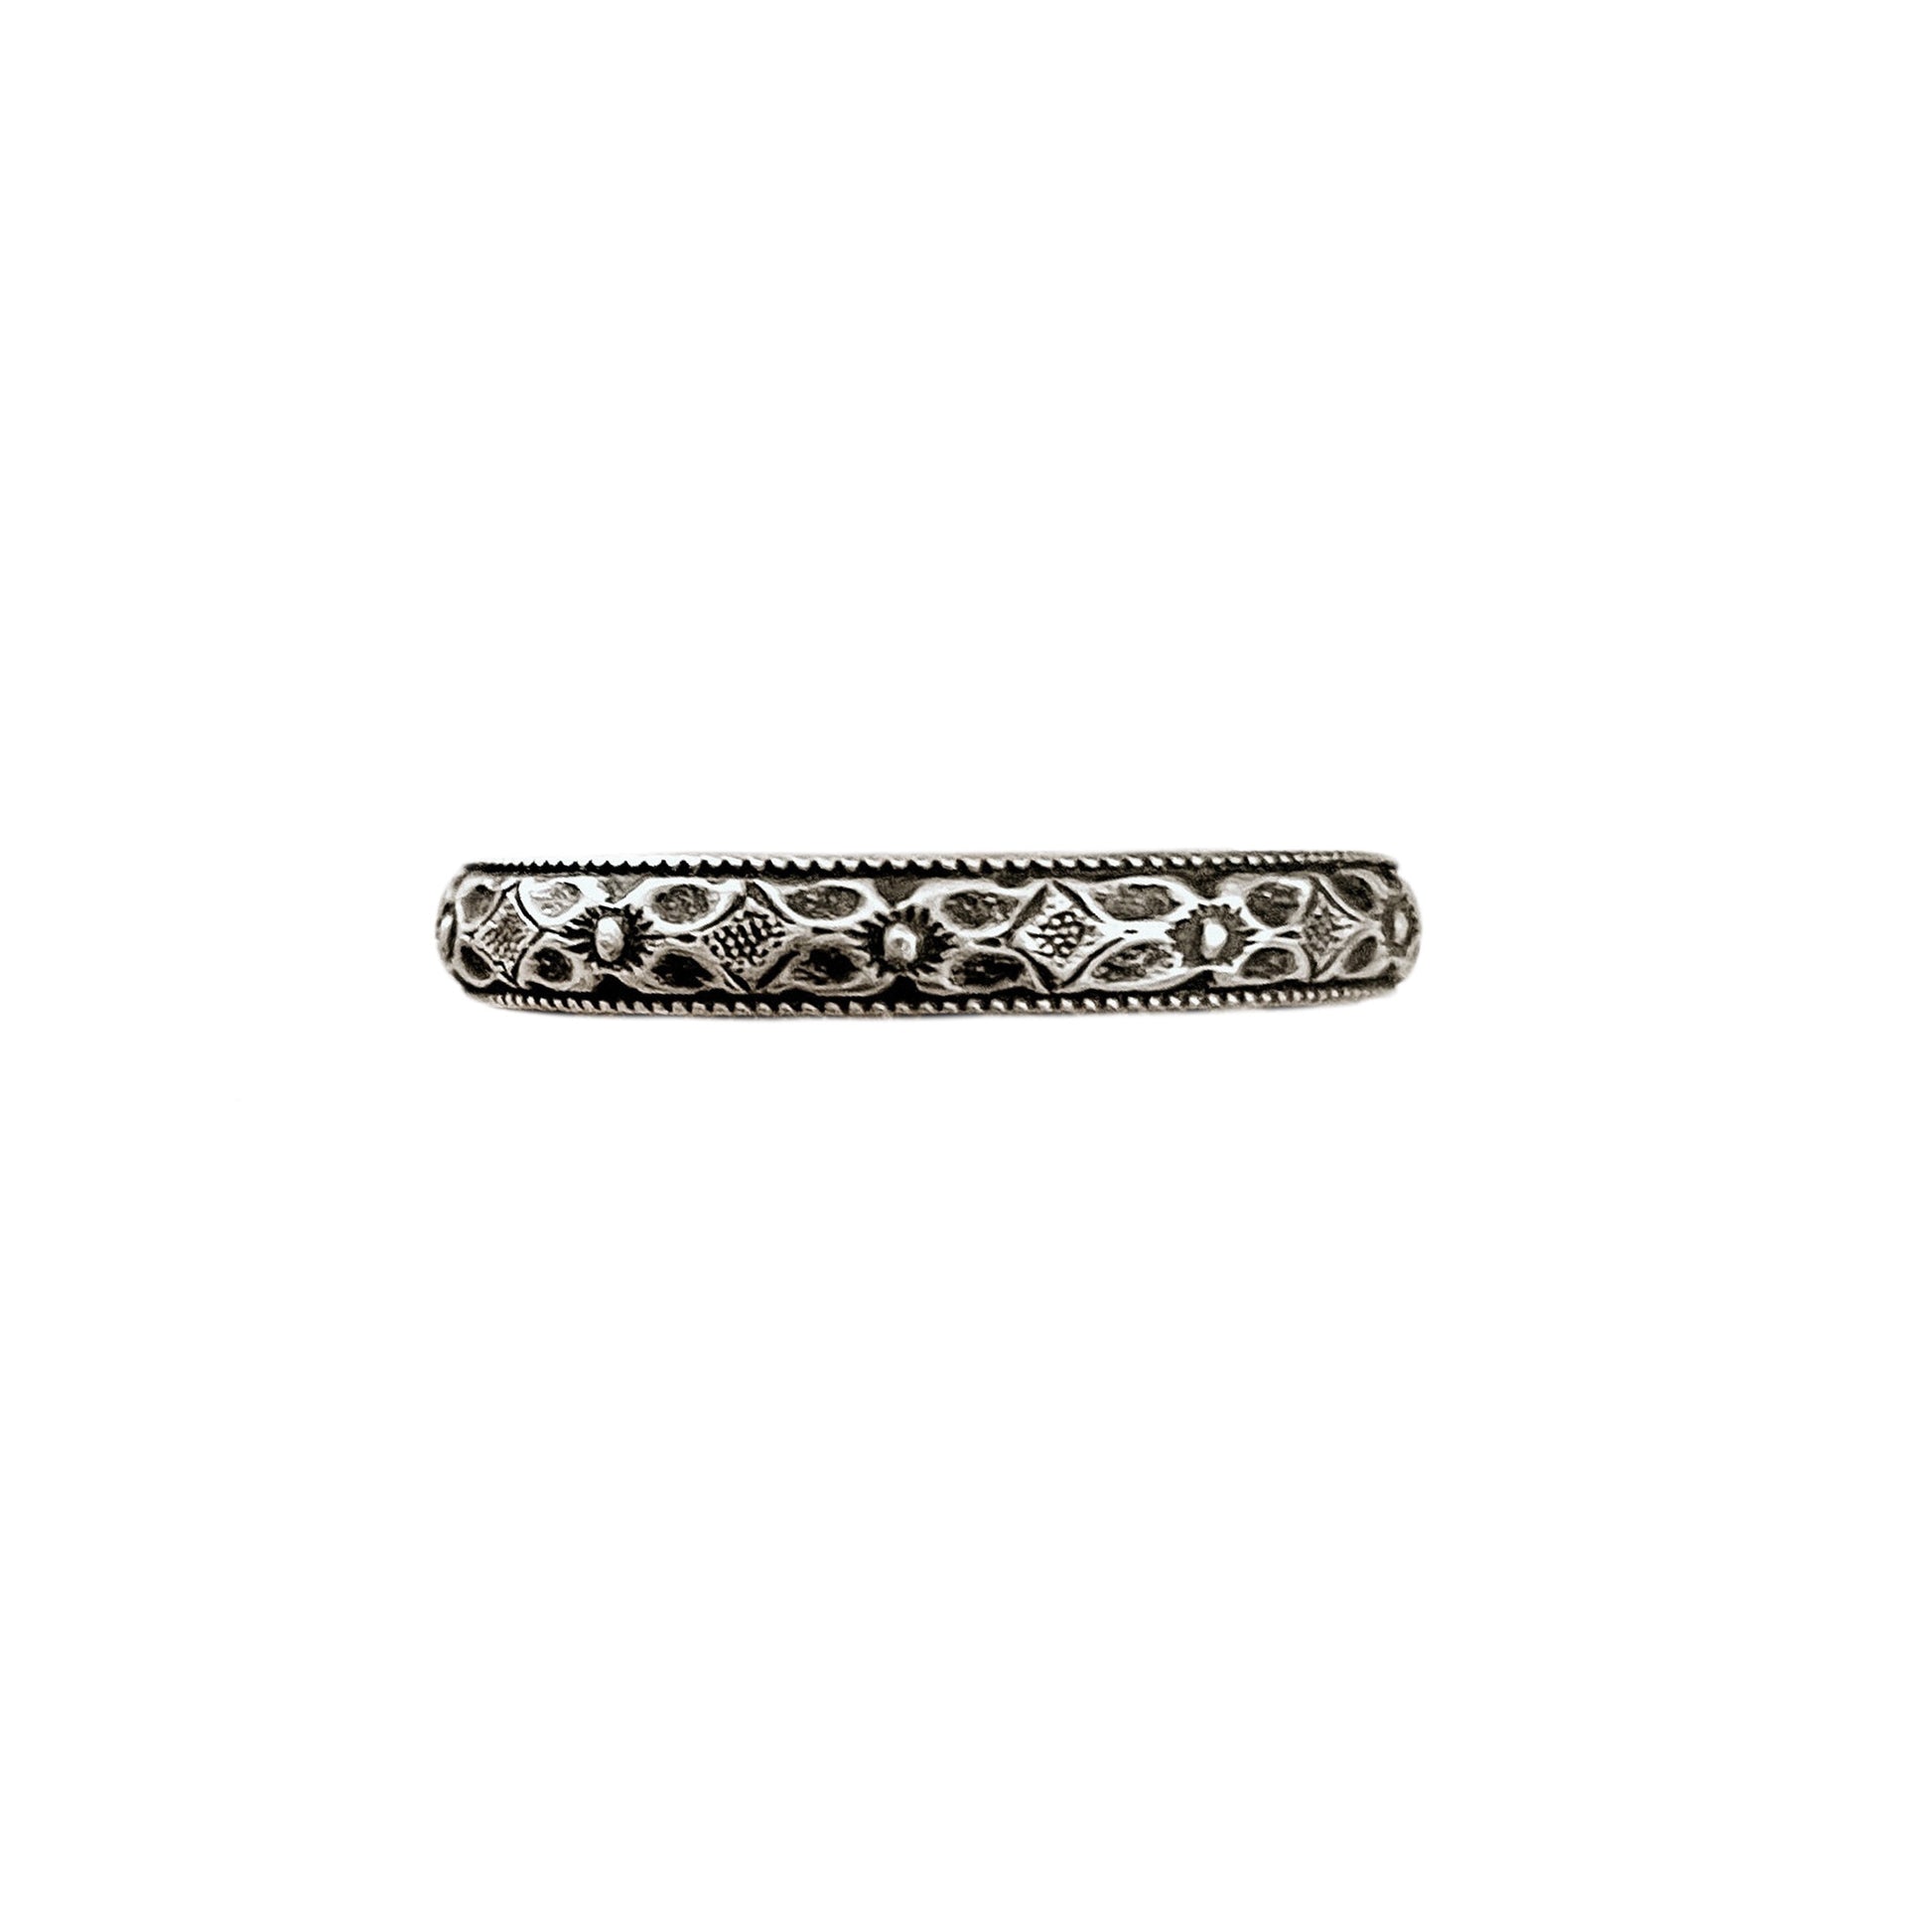 Diamond Floral Sterling Silver Thin Stacking Ring shown in antiqued finish for a true vintage appearance.